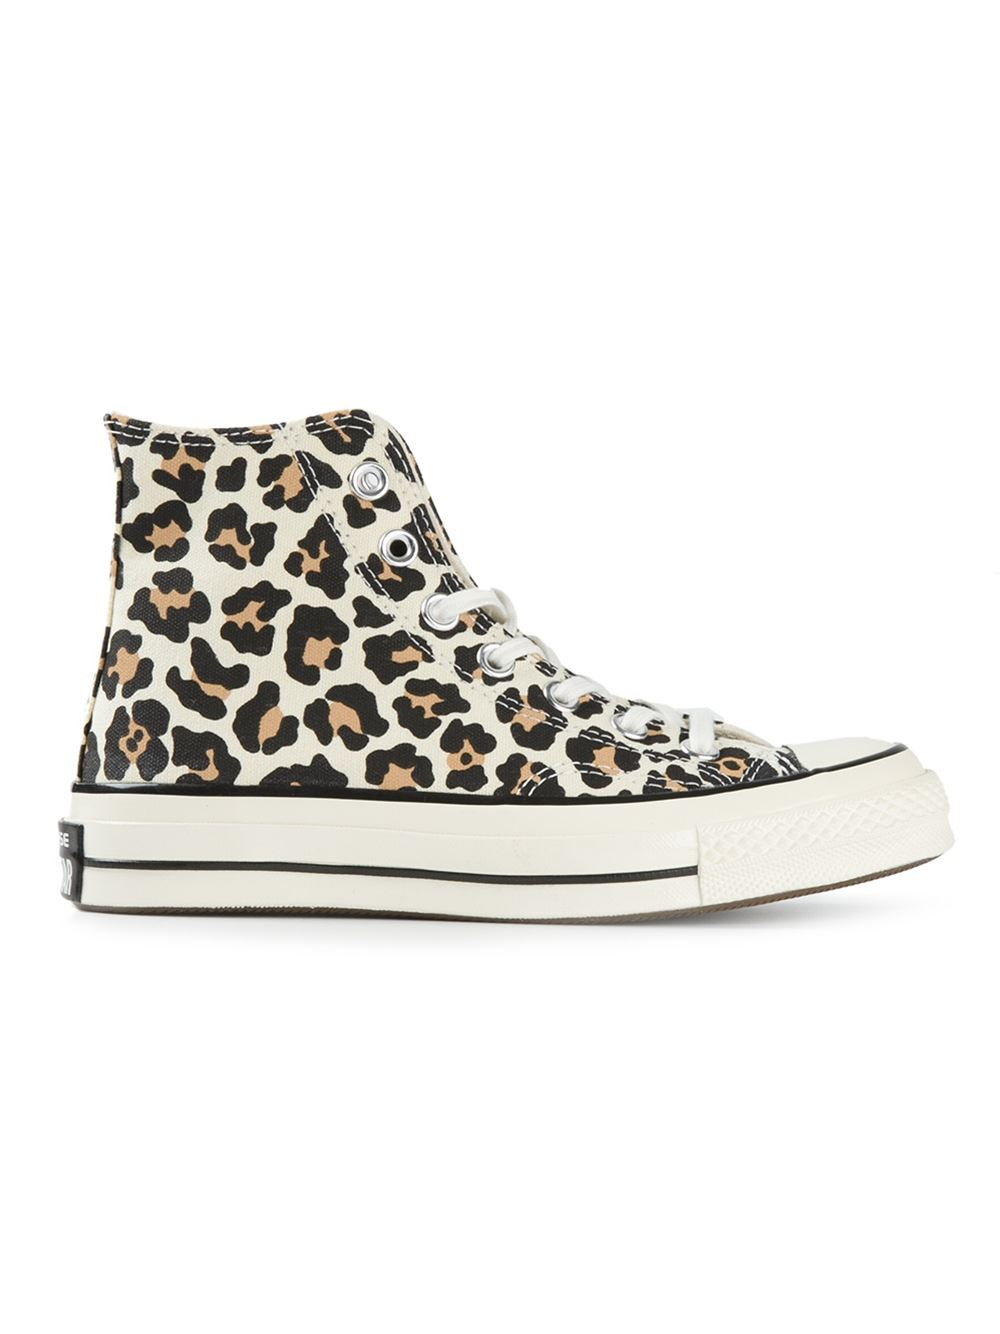 Converse 'Chuck Taylor' Leopard Print Sneakers in Brown - Lyst